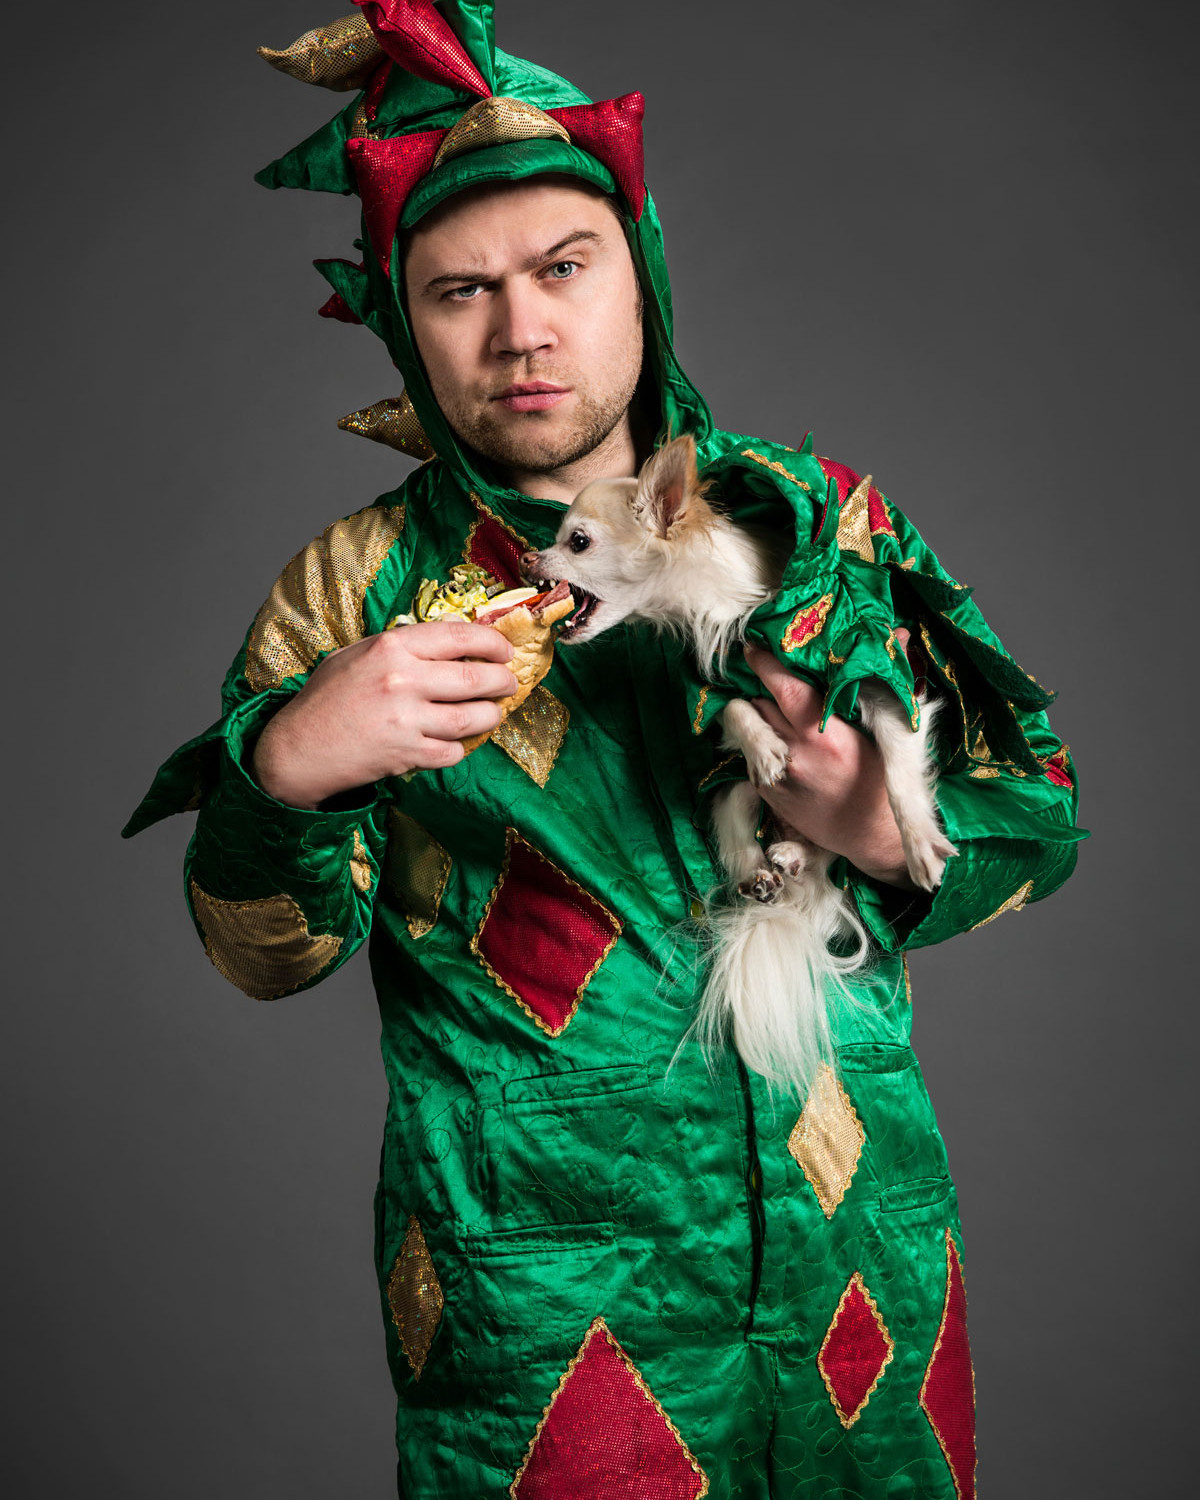 Piff the Magic Dragon, pictured, provided Penn with restaurant recs